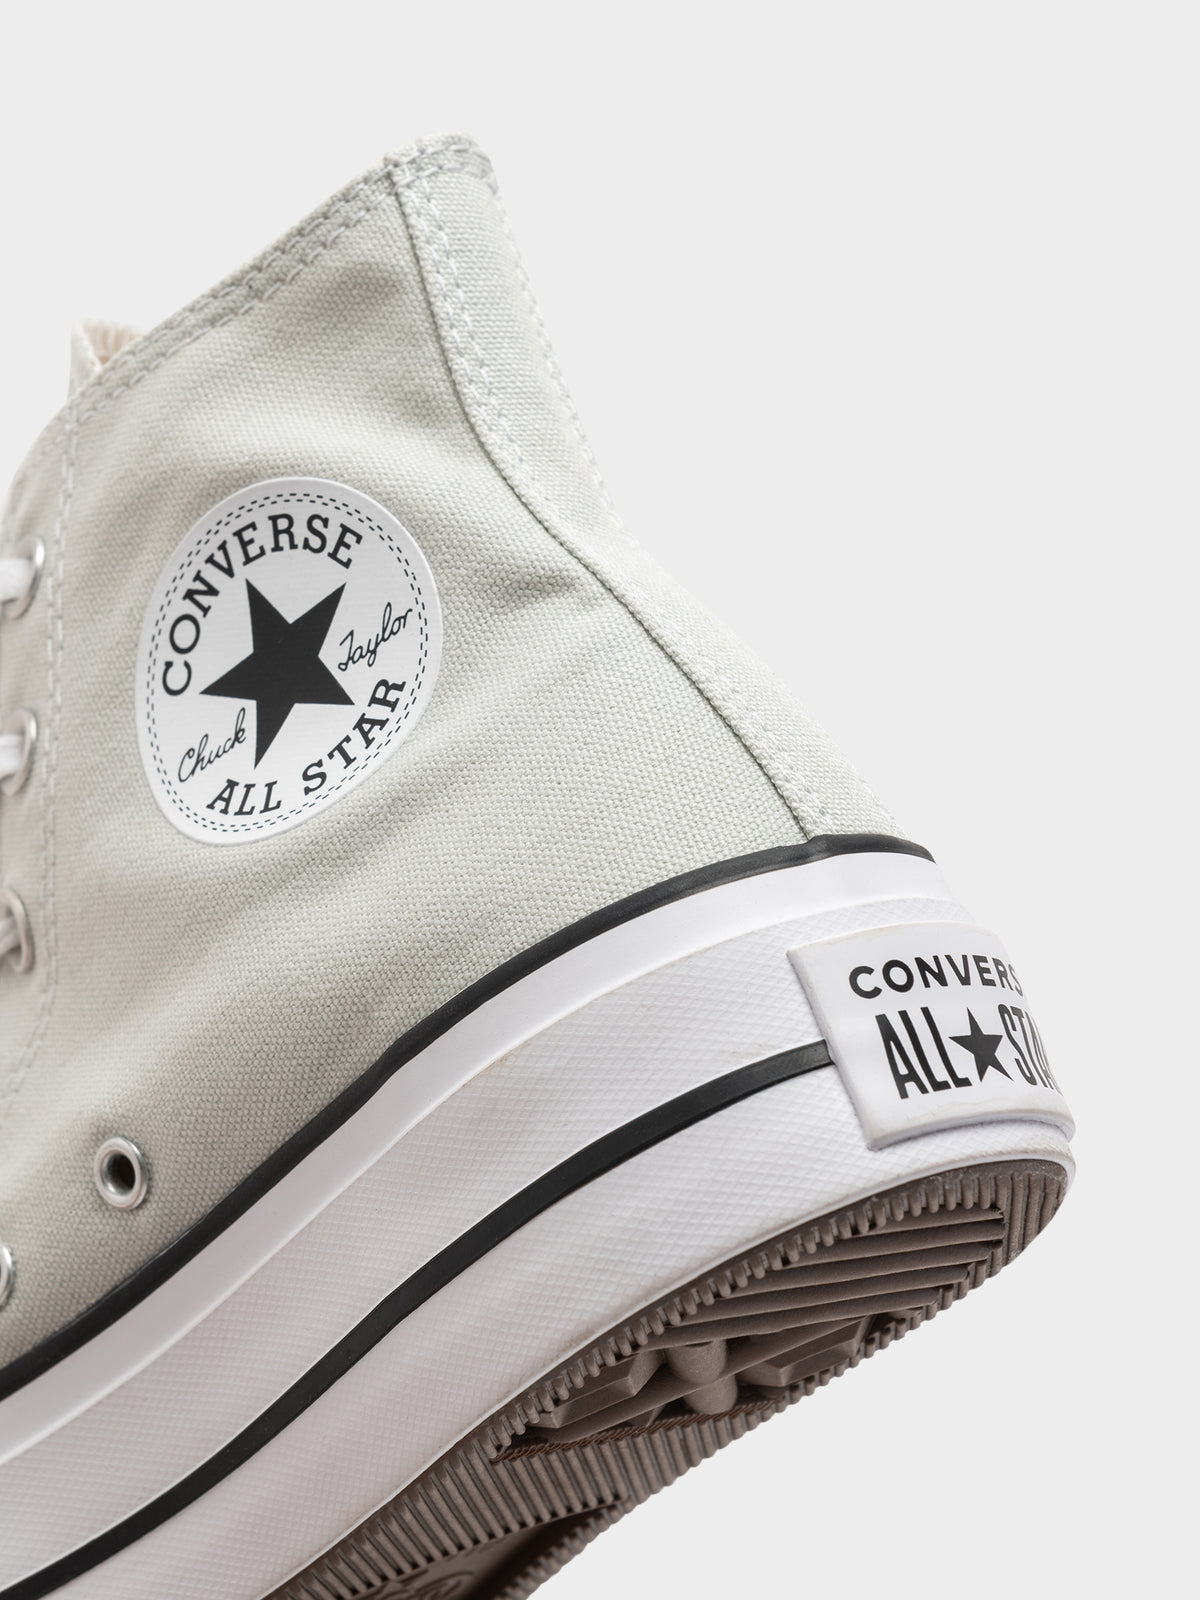 Womens Chuck Taylor All Star Lift High Top in Light Silver